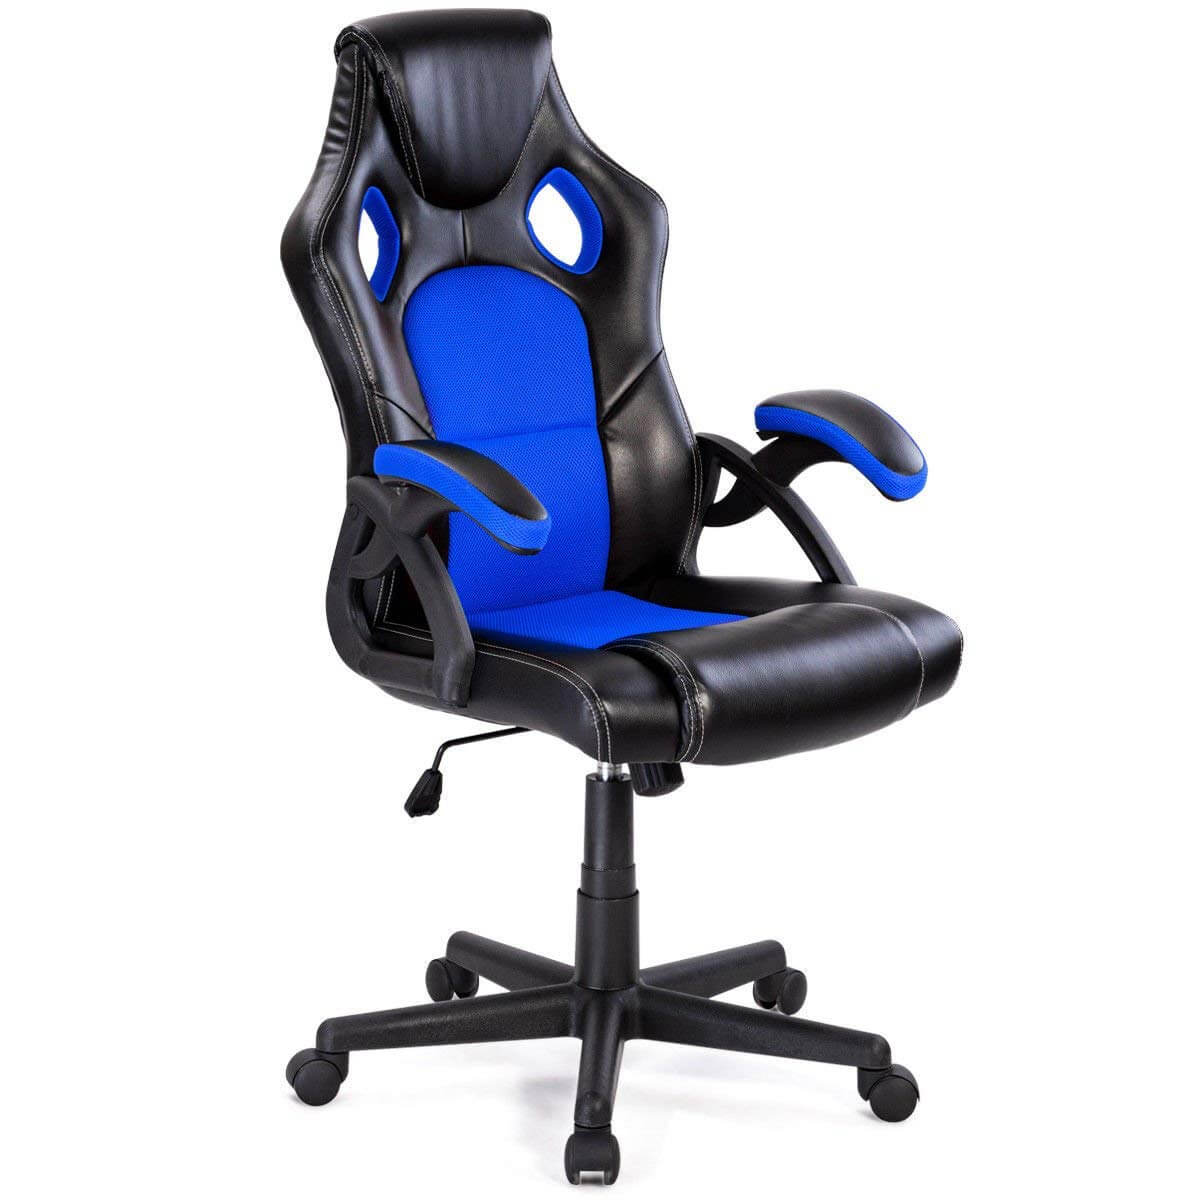 10 Best Gaming Chairs Under 100 USD (100 Quality) 2021